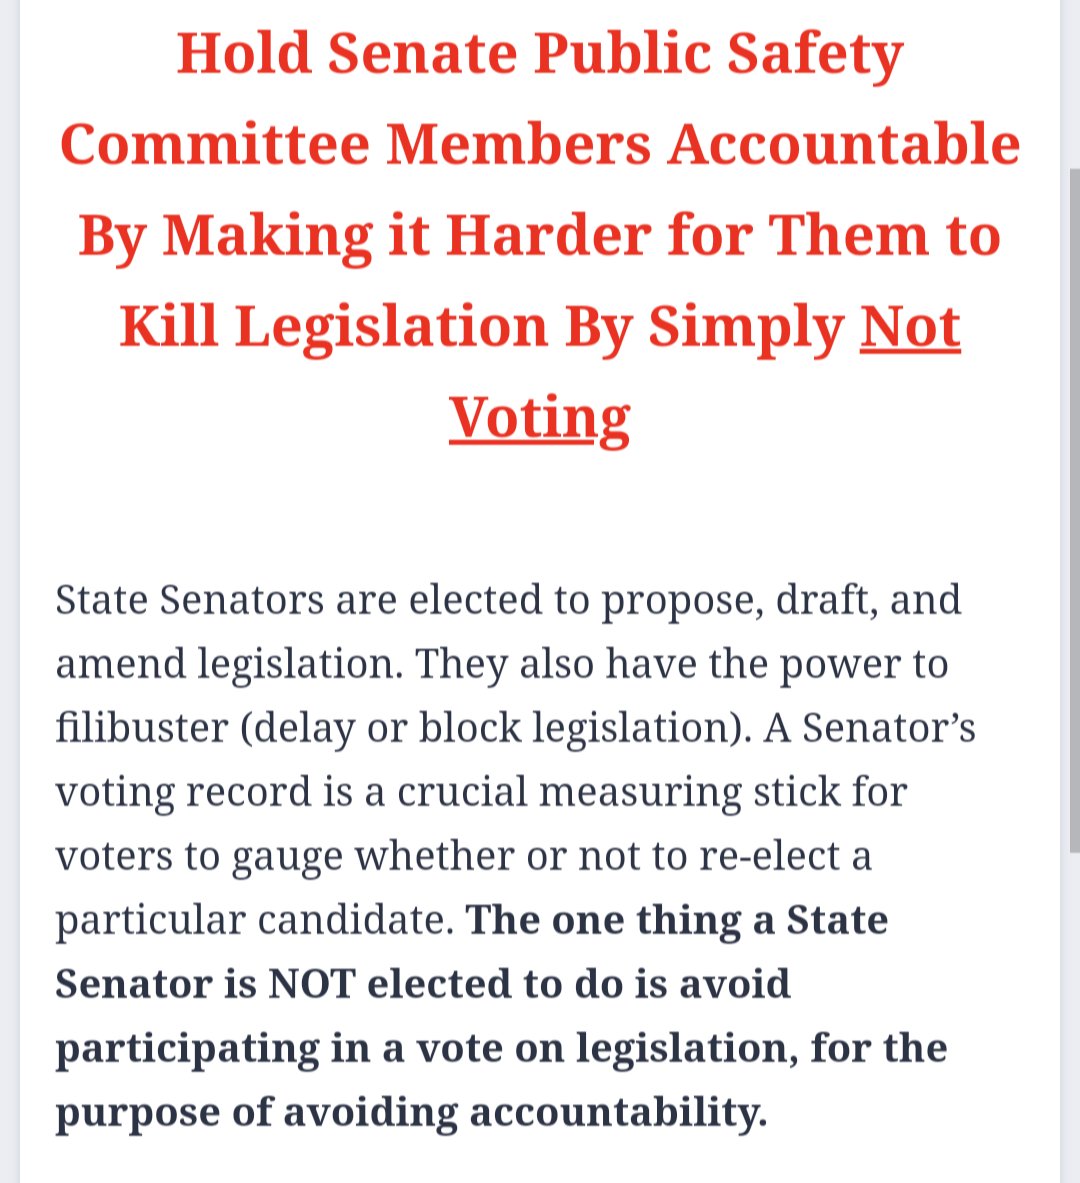 It only takes 30 seconds. Hit this link to tell our State Senators to vote NO on bad legislation instead of not voting at all 👇 form.jotform.com/241270826766159